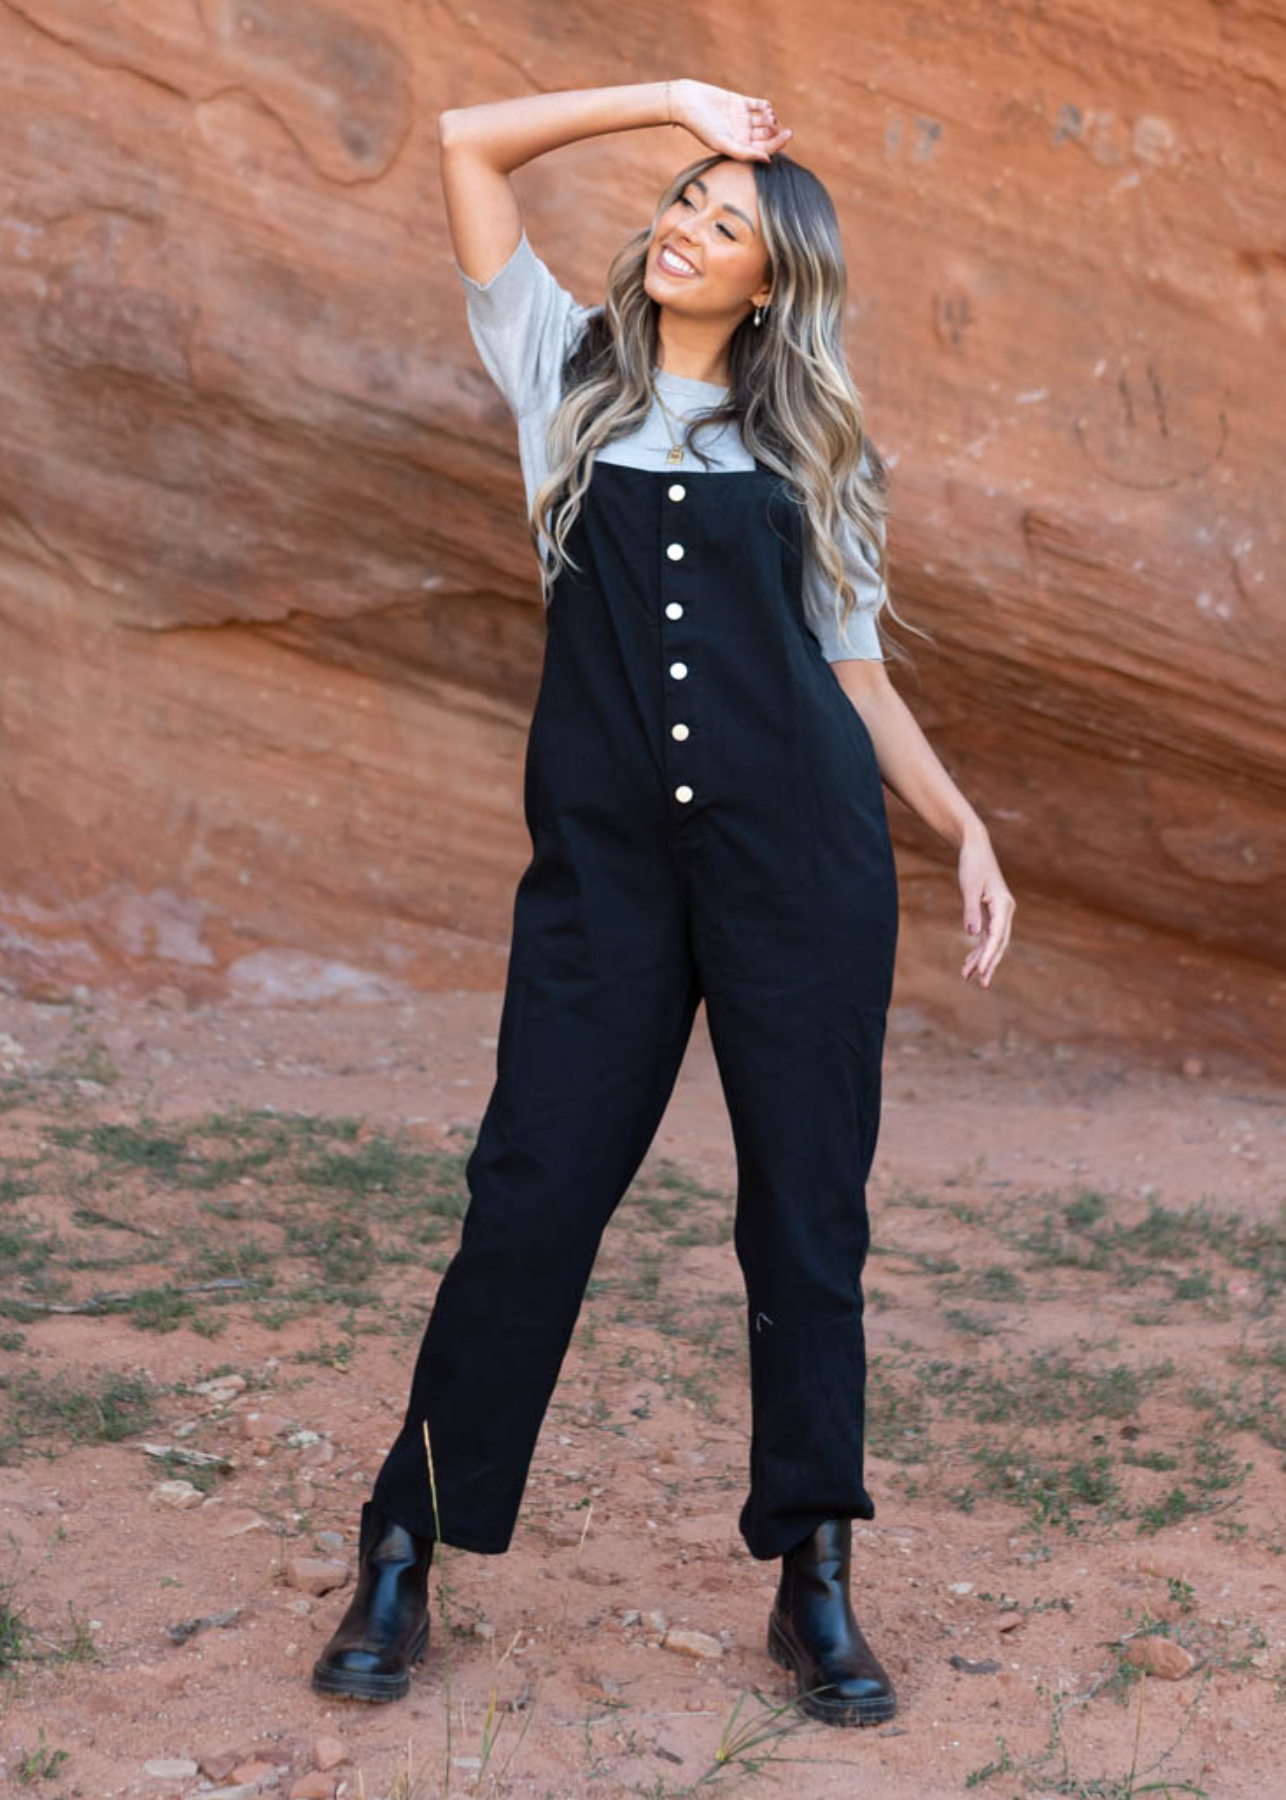 Black jumpsuit with white buttons